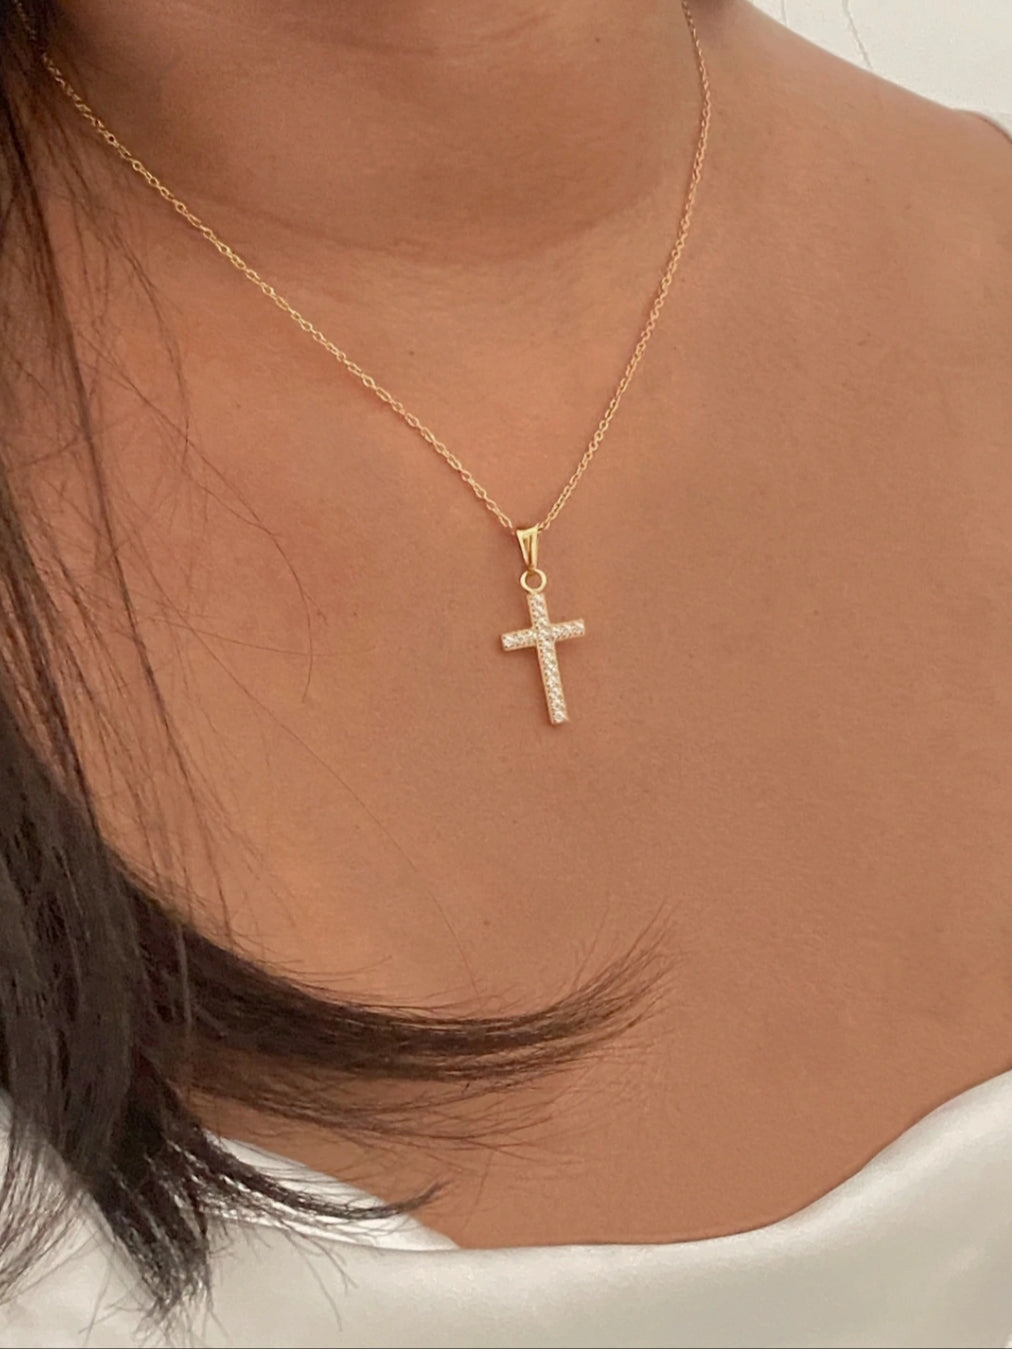 Light Weight Fancy Daily Wear Gold Plated Cross Pendant at Best Price in  Chennai | Regaliaz